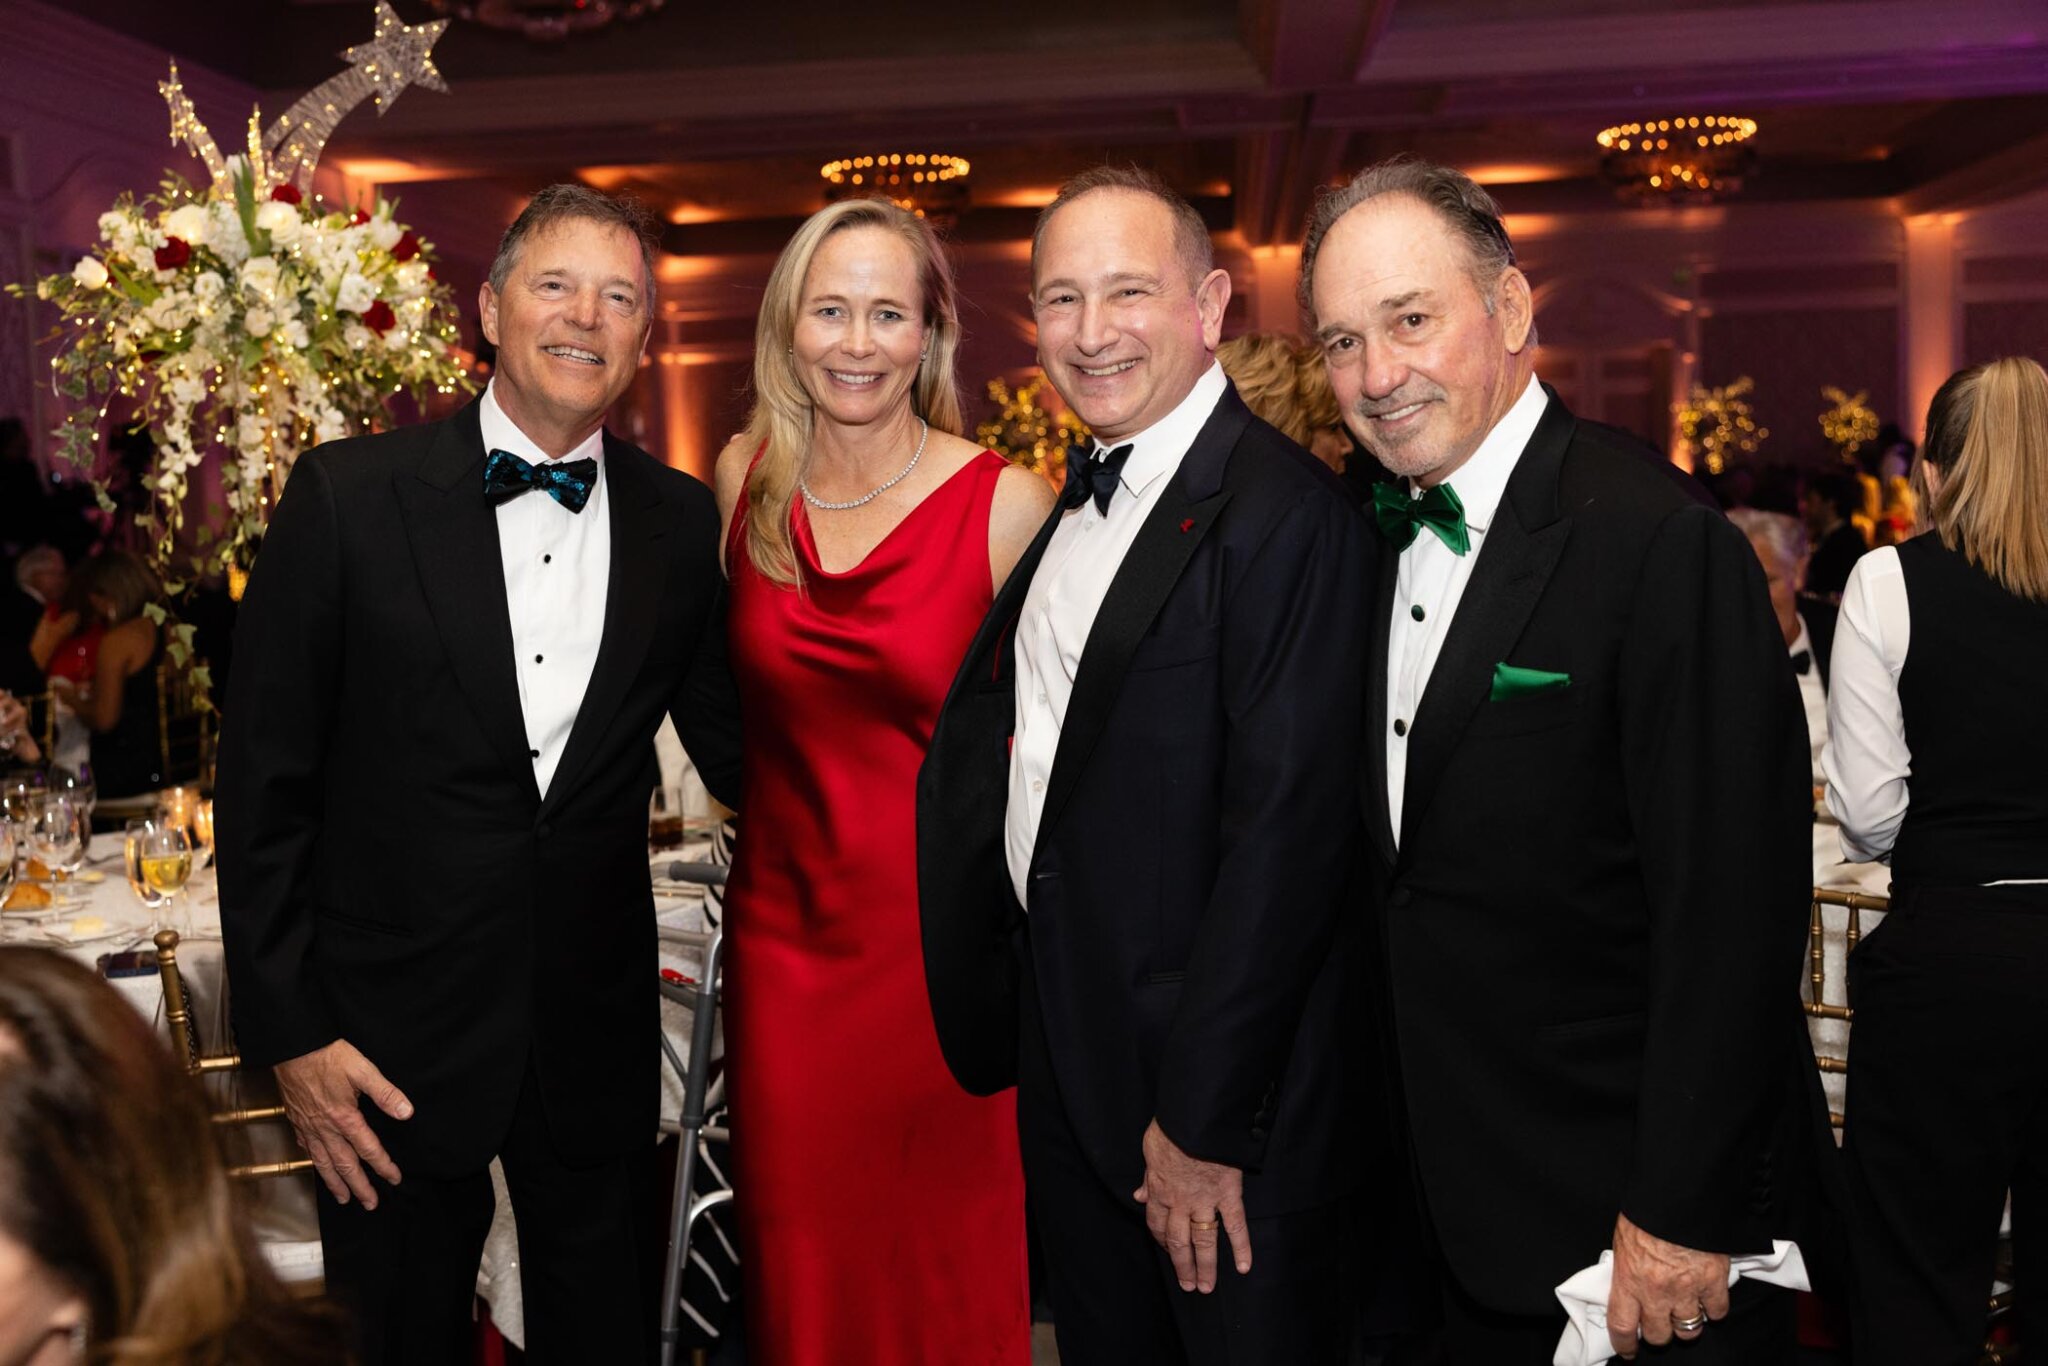 Peter and Simone Bonutti with Moti Ferder and Ron McMackin at the Lady in Red Gala